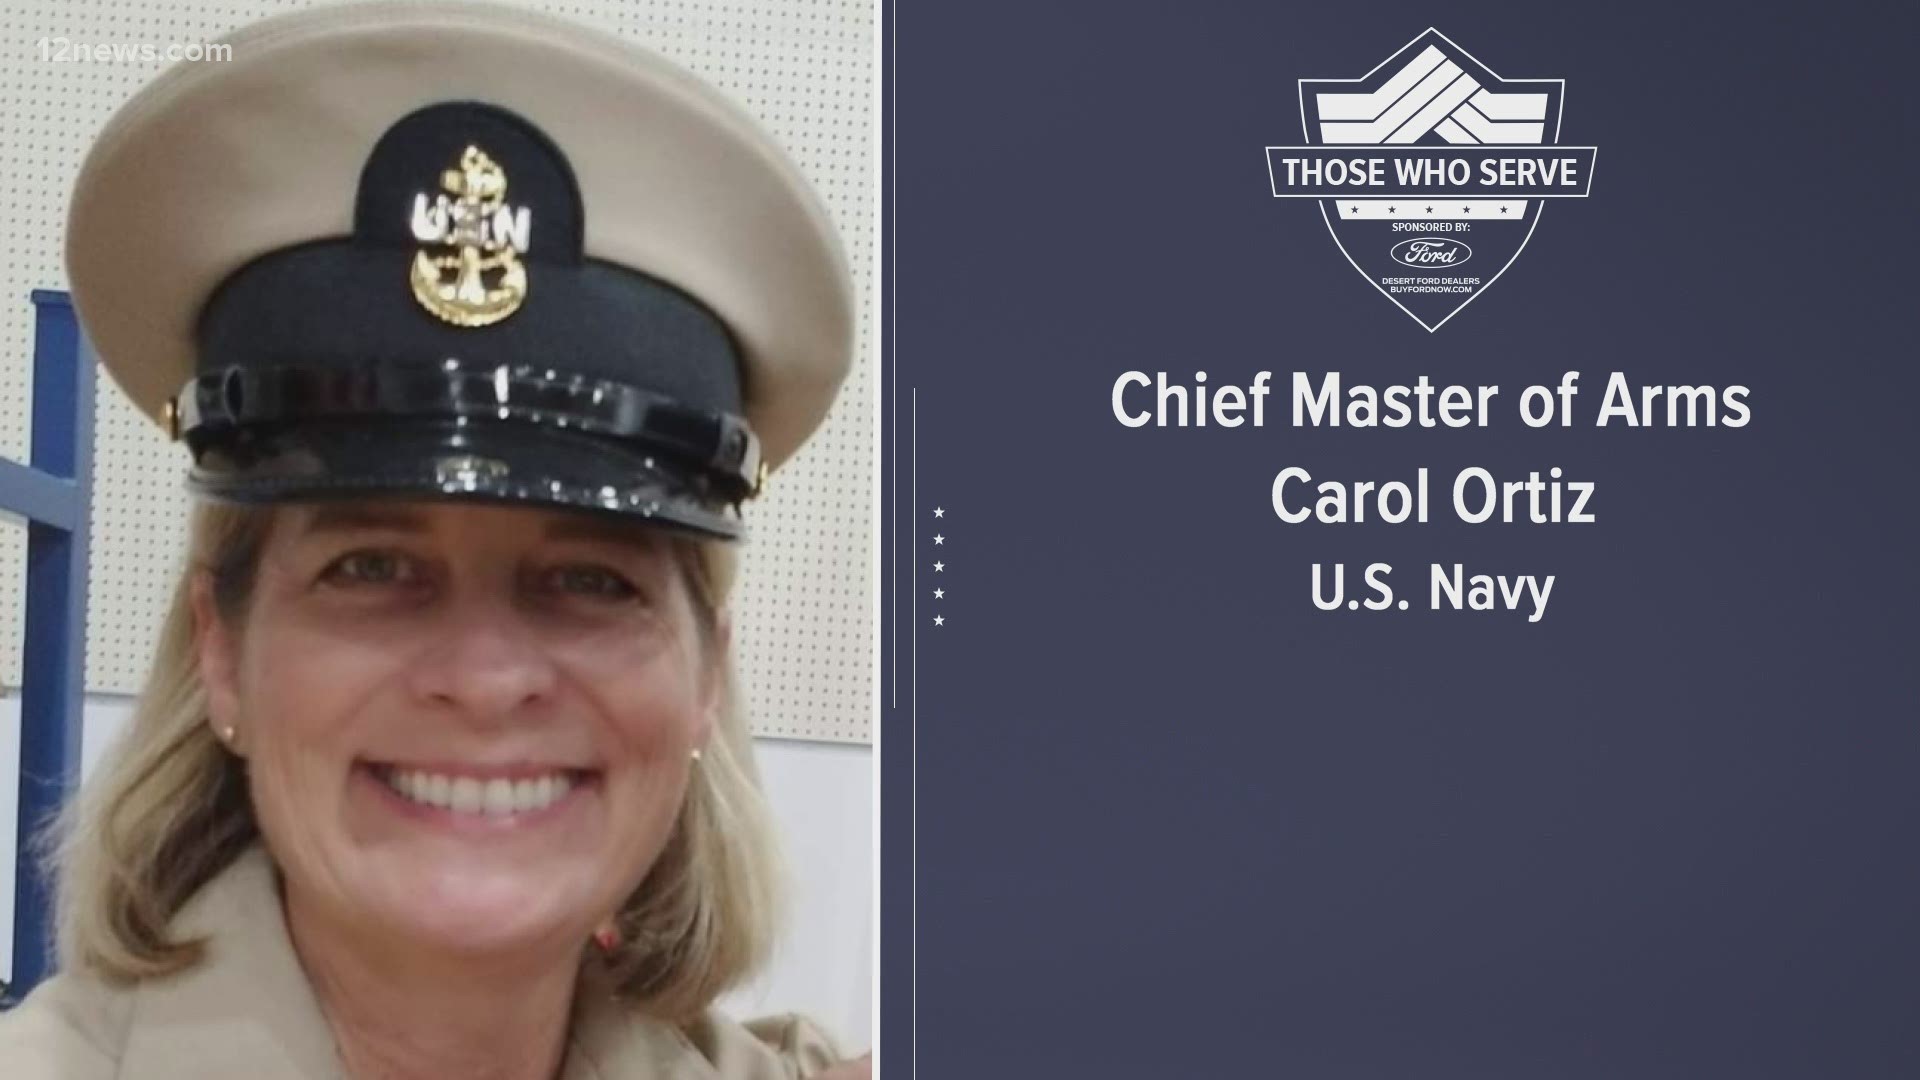 This week, we take a moment to honor Chief Master of Arms Carol Ortiz and Staff Sergeant Daniel Green.